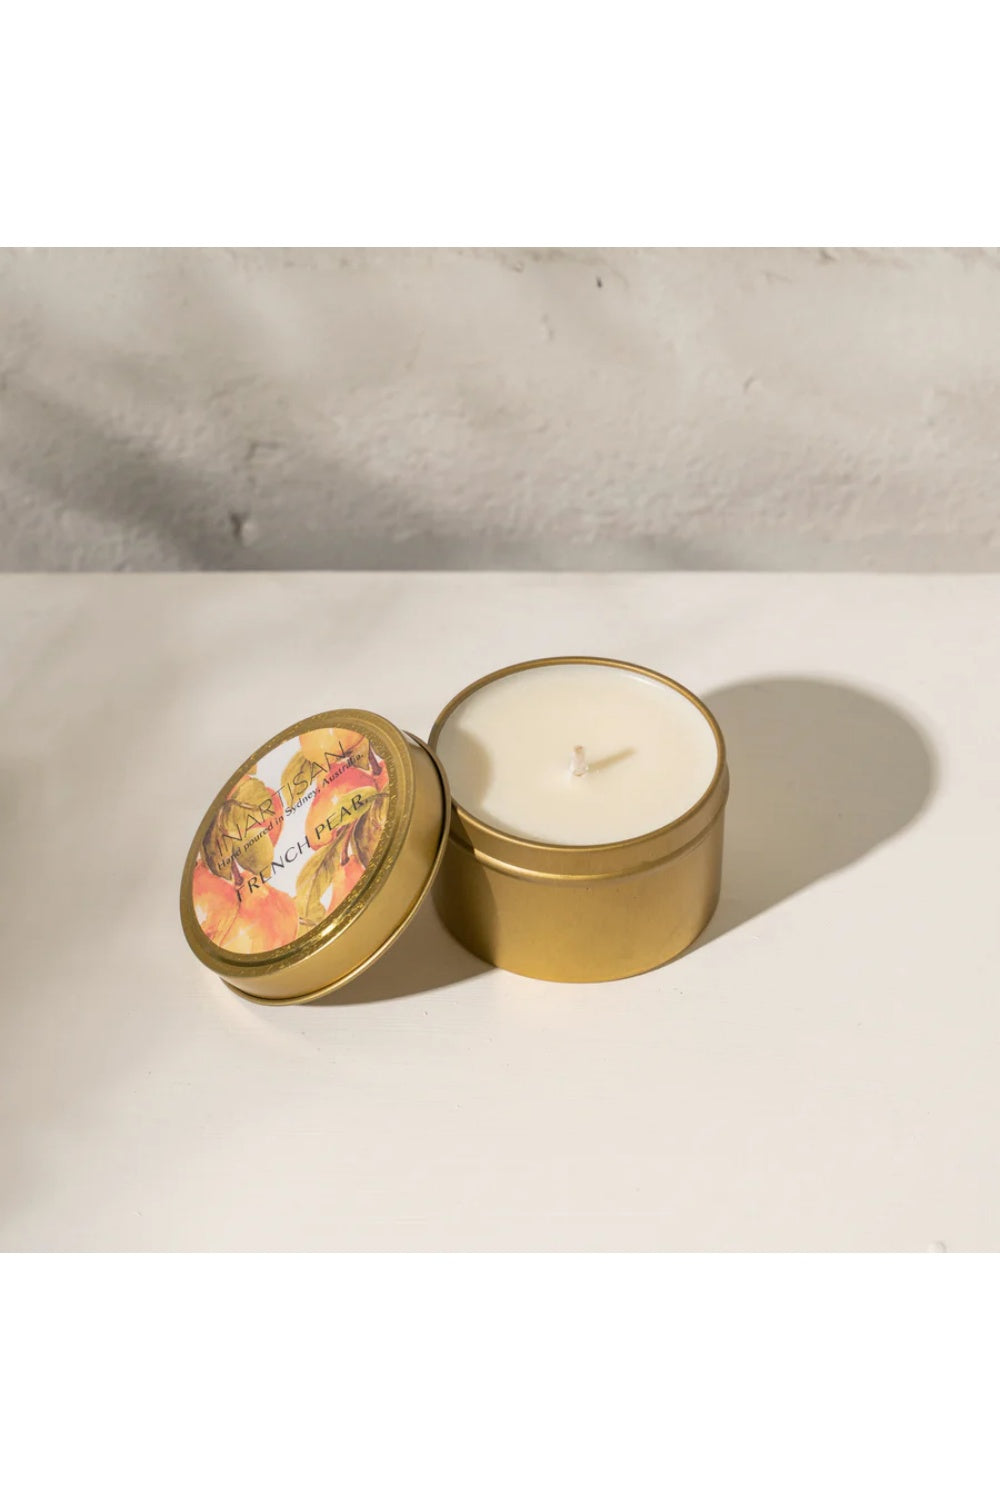 TRAVEL CANDLE FRENCH PEAR